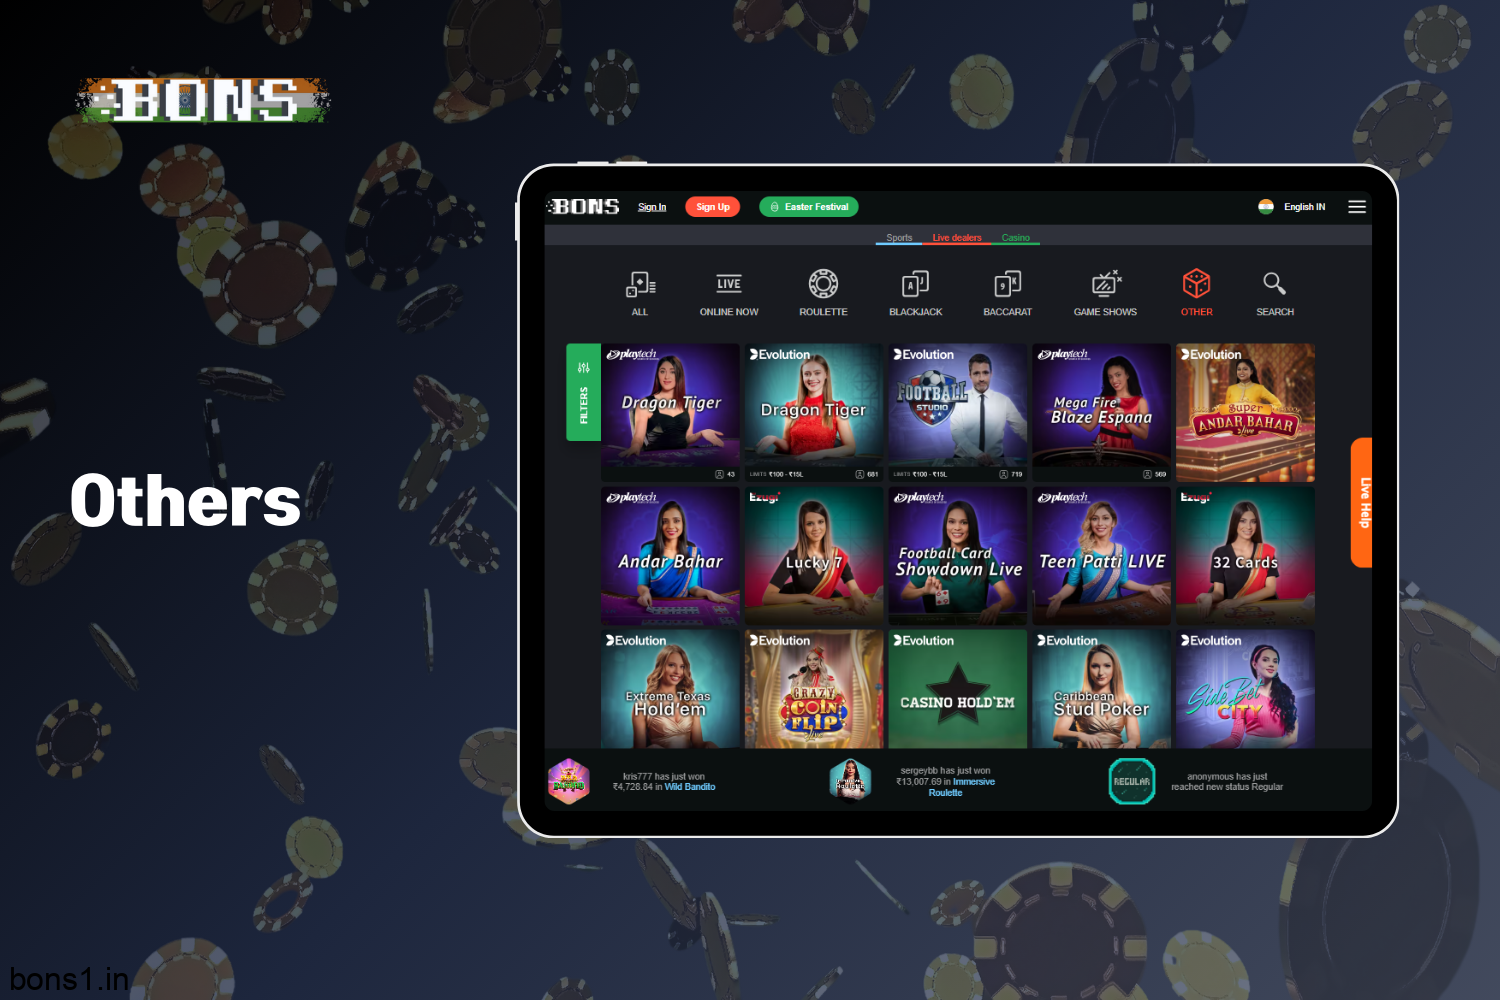 Bons Casino's Live Casino section provides a wide range of others games for players from India